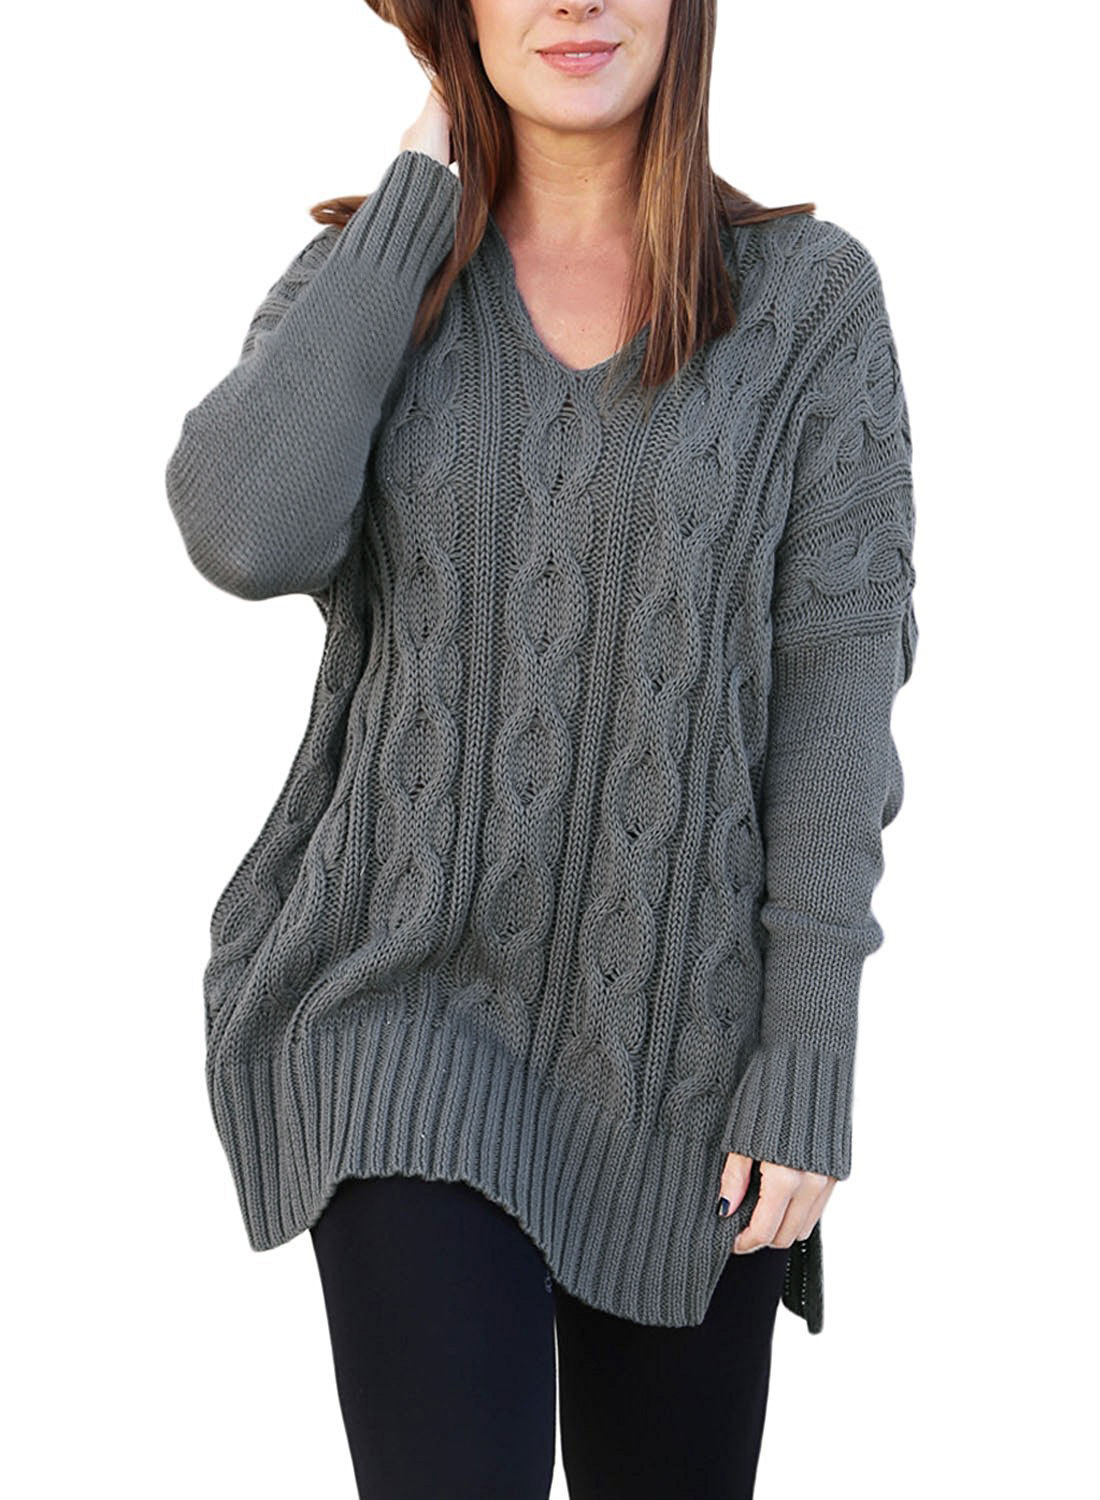 Design Fashion V Neck High Low Pullover Sweater For Women Am114 - Grey